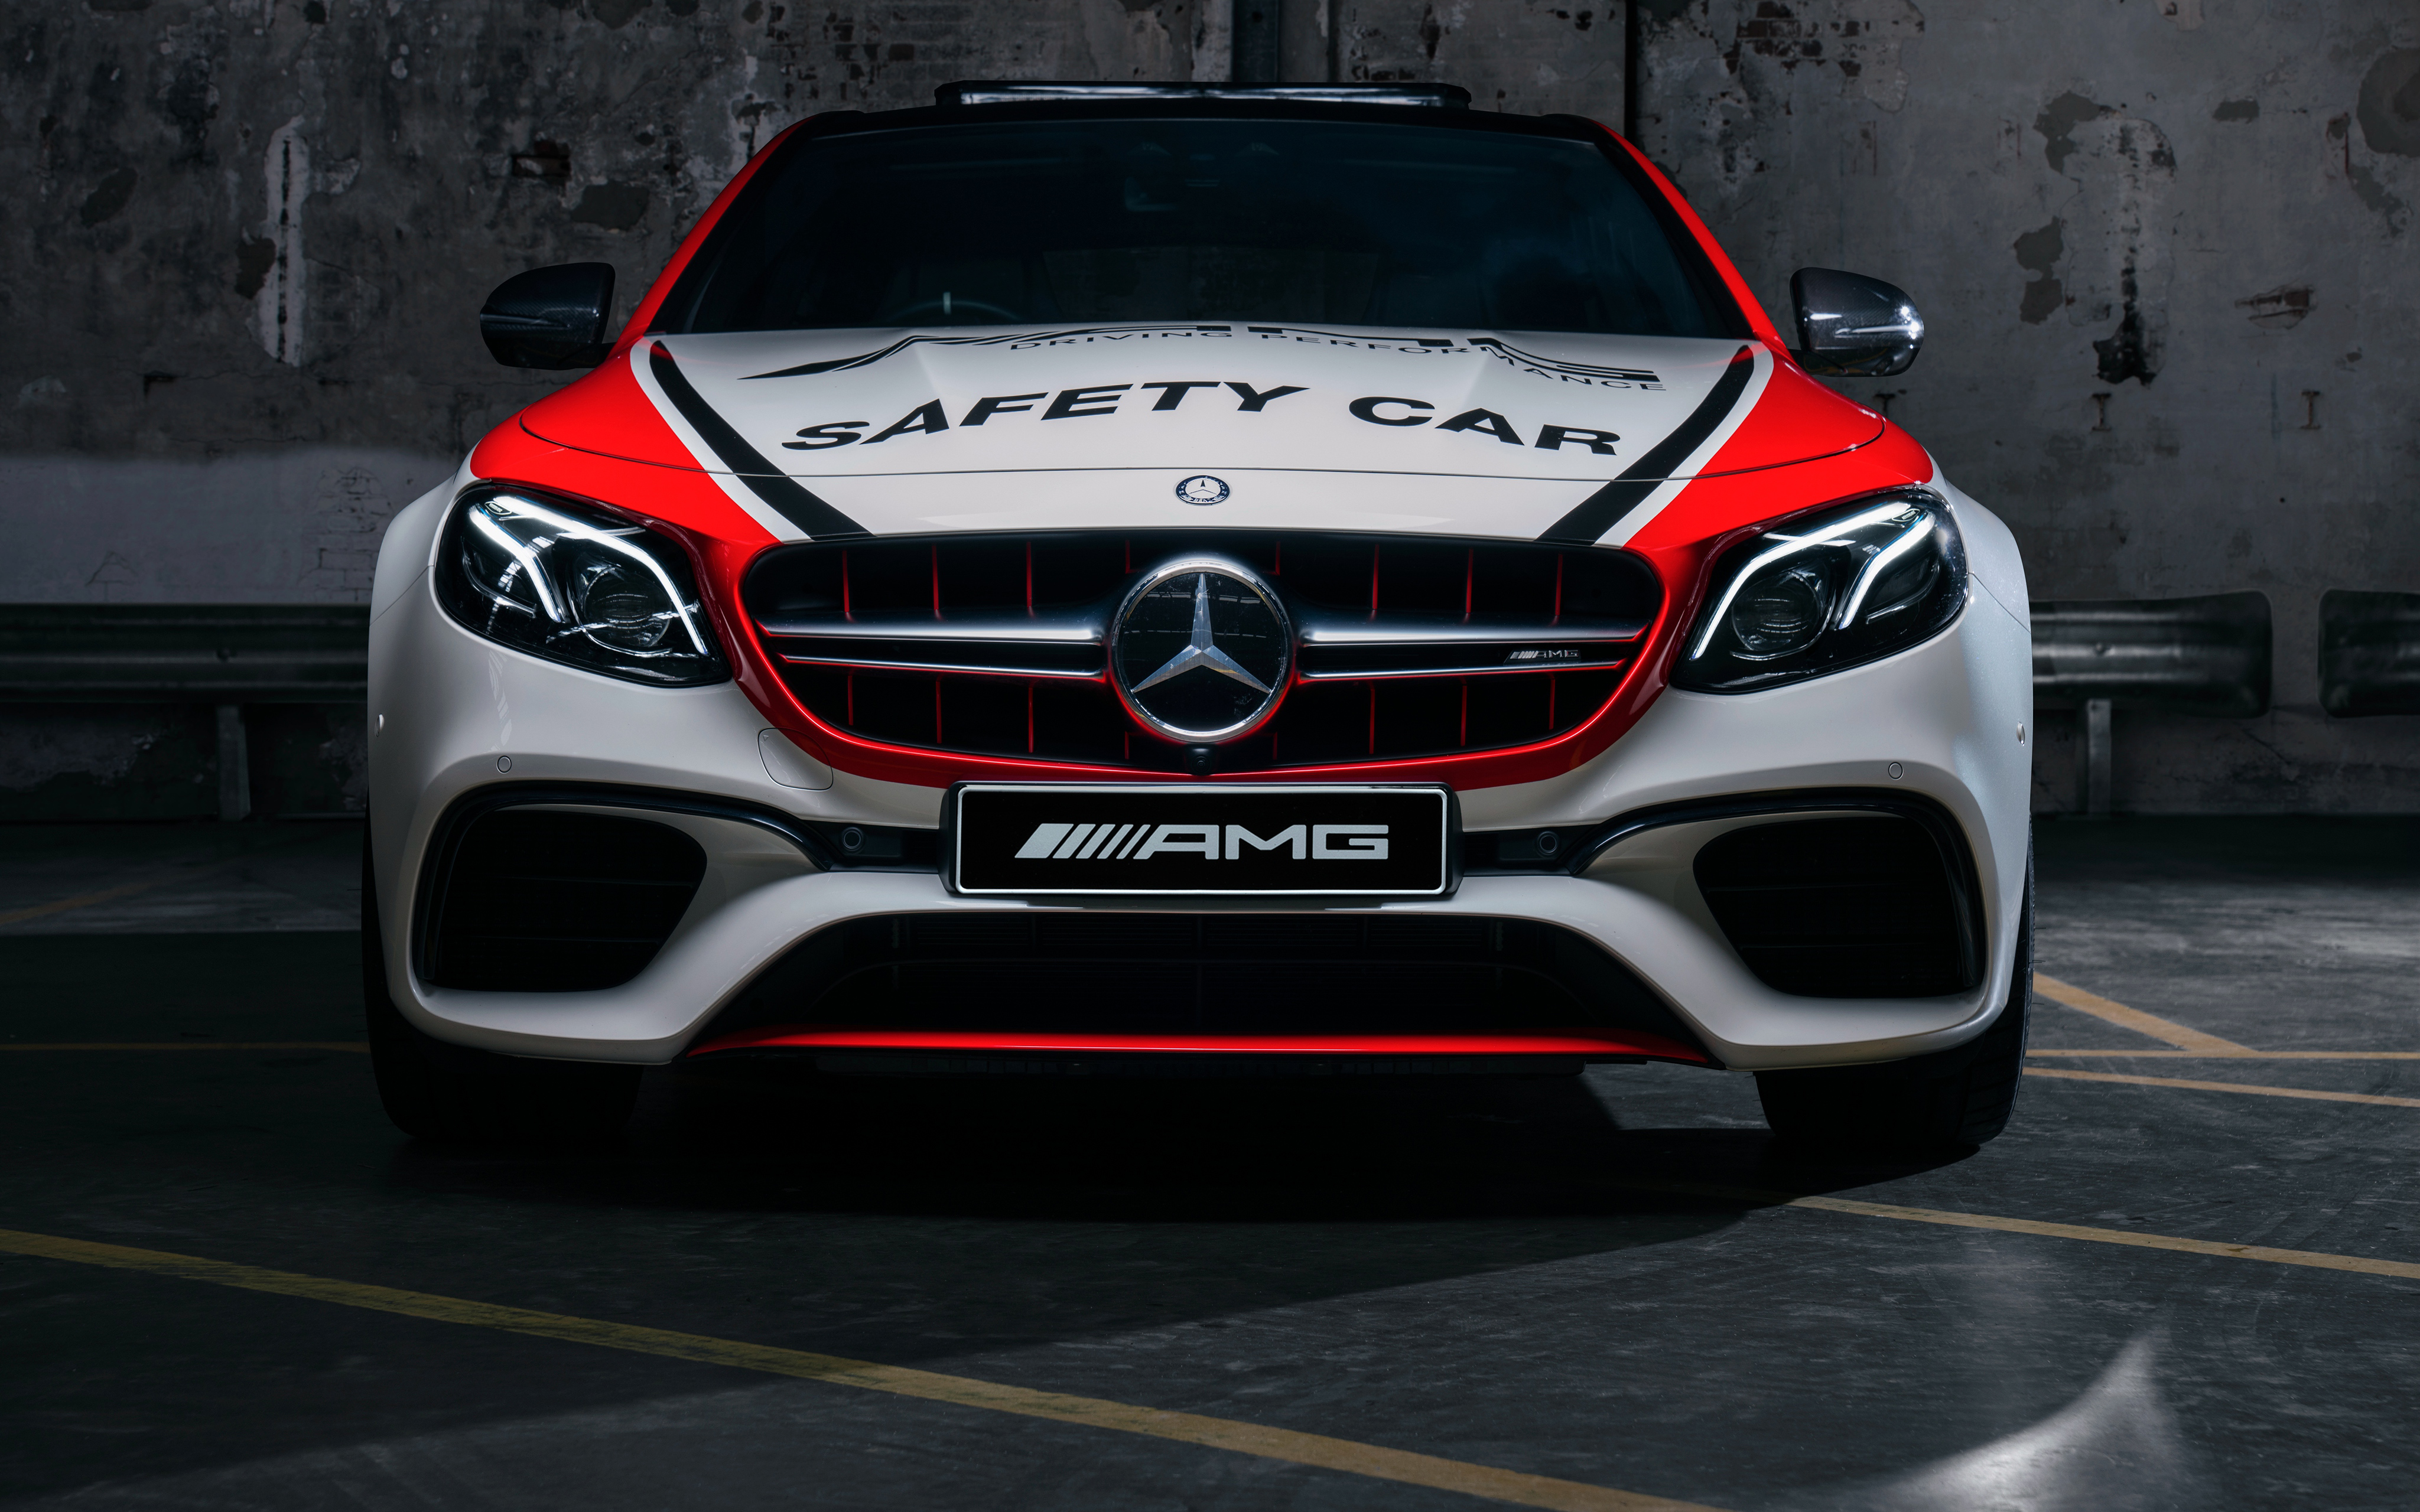 Mercedes Amg E 63 S 4matic Safety Car 2018 4k Wallpapers - Mercedes Benz Safety Cars 2018 - HD Wallpaper 